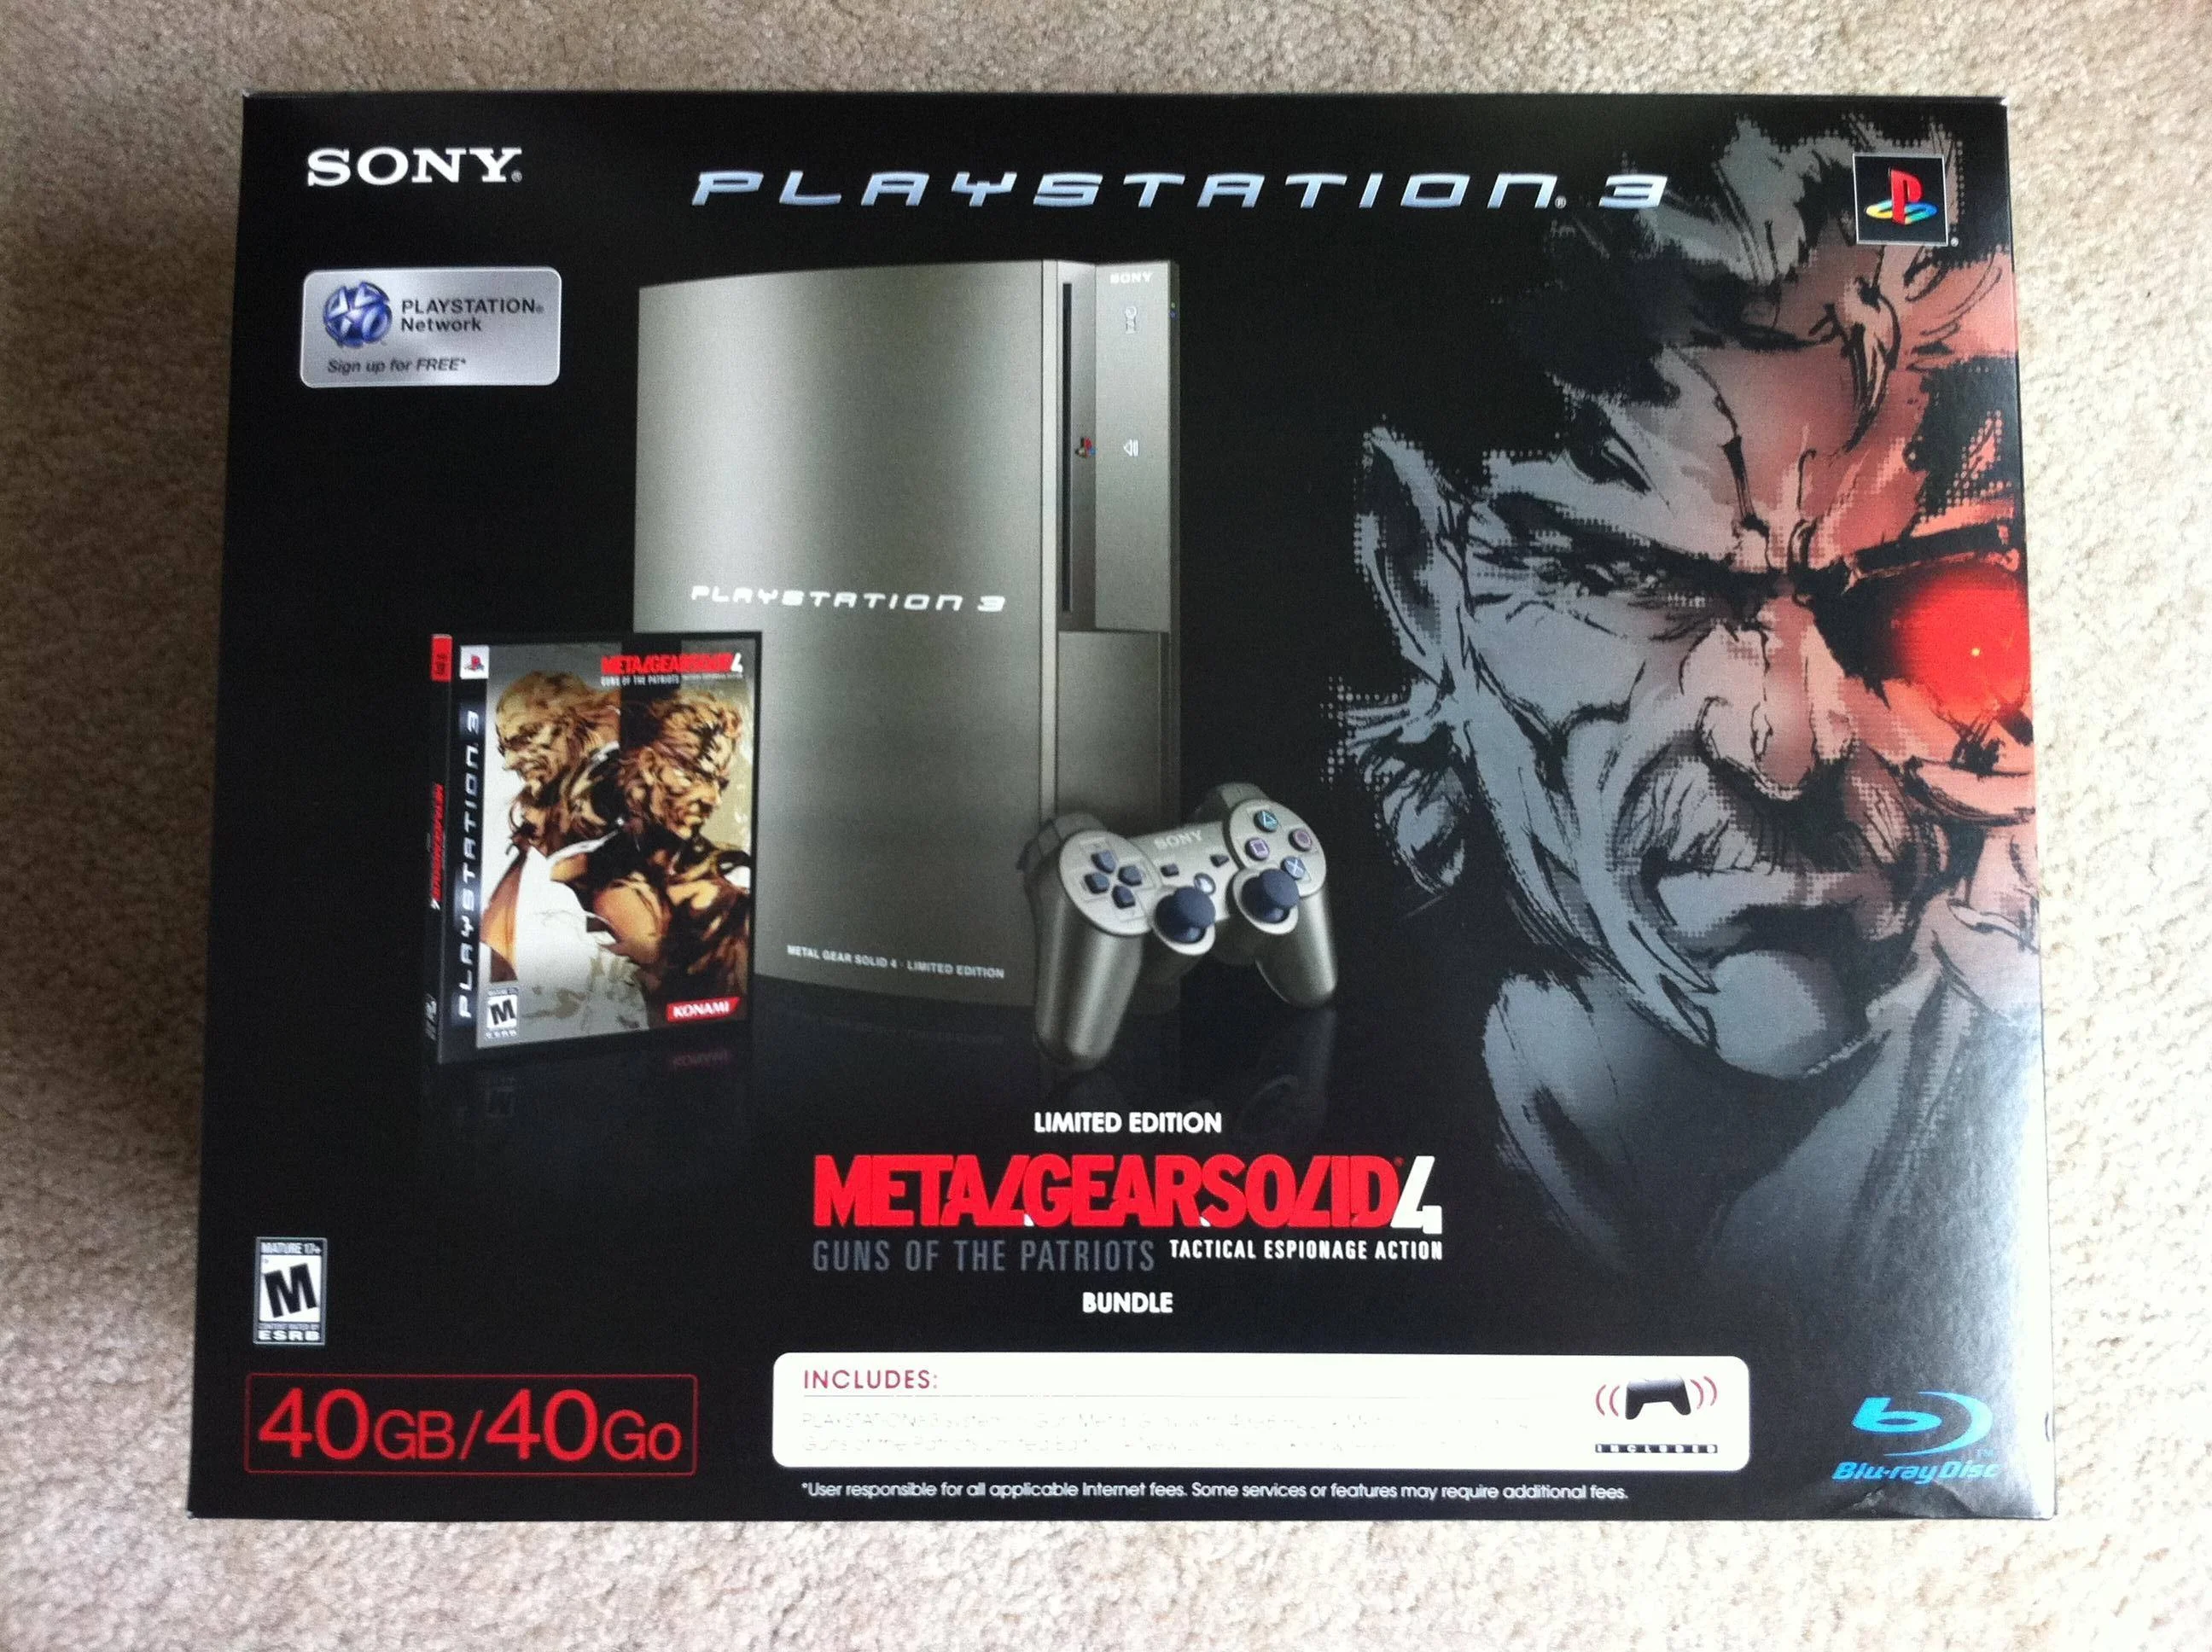 Ps3 old. Metal Gear Limited Edition ps3. Metal Gear Solid 4 ps3 Limited Edition. Ps3 Slim Limited Edition. Sony PLAYSTATION 3 Metal Gear Solid Limited Edition.